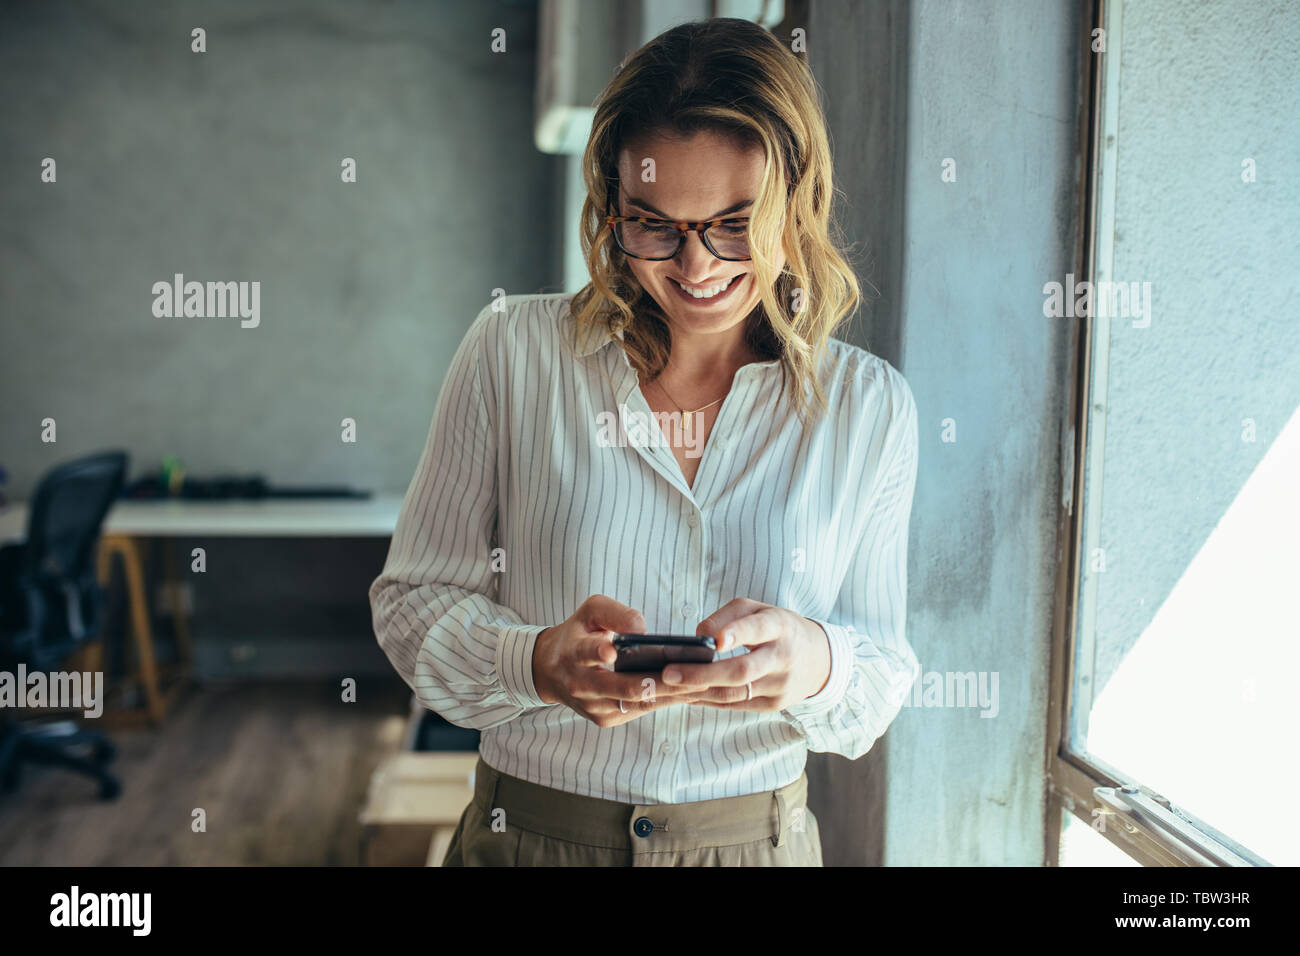 Businesswoman using her smart phone in office. Female entrepreneur looking at her mobile phone and smiling. Reading text messages. Stock Photo